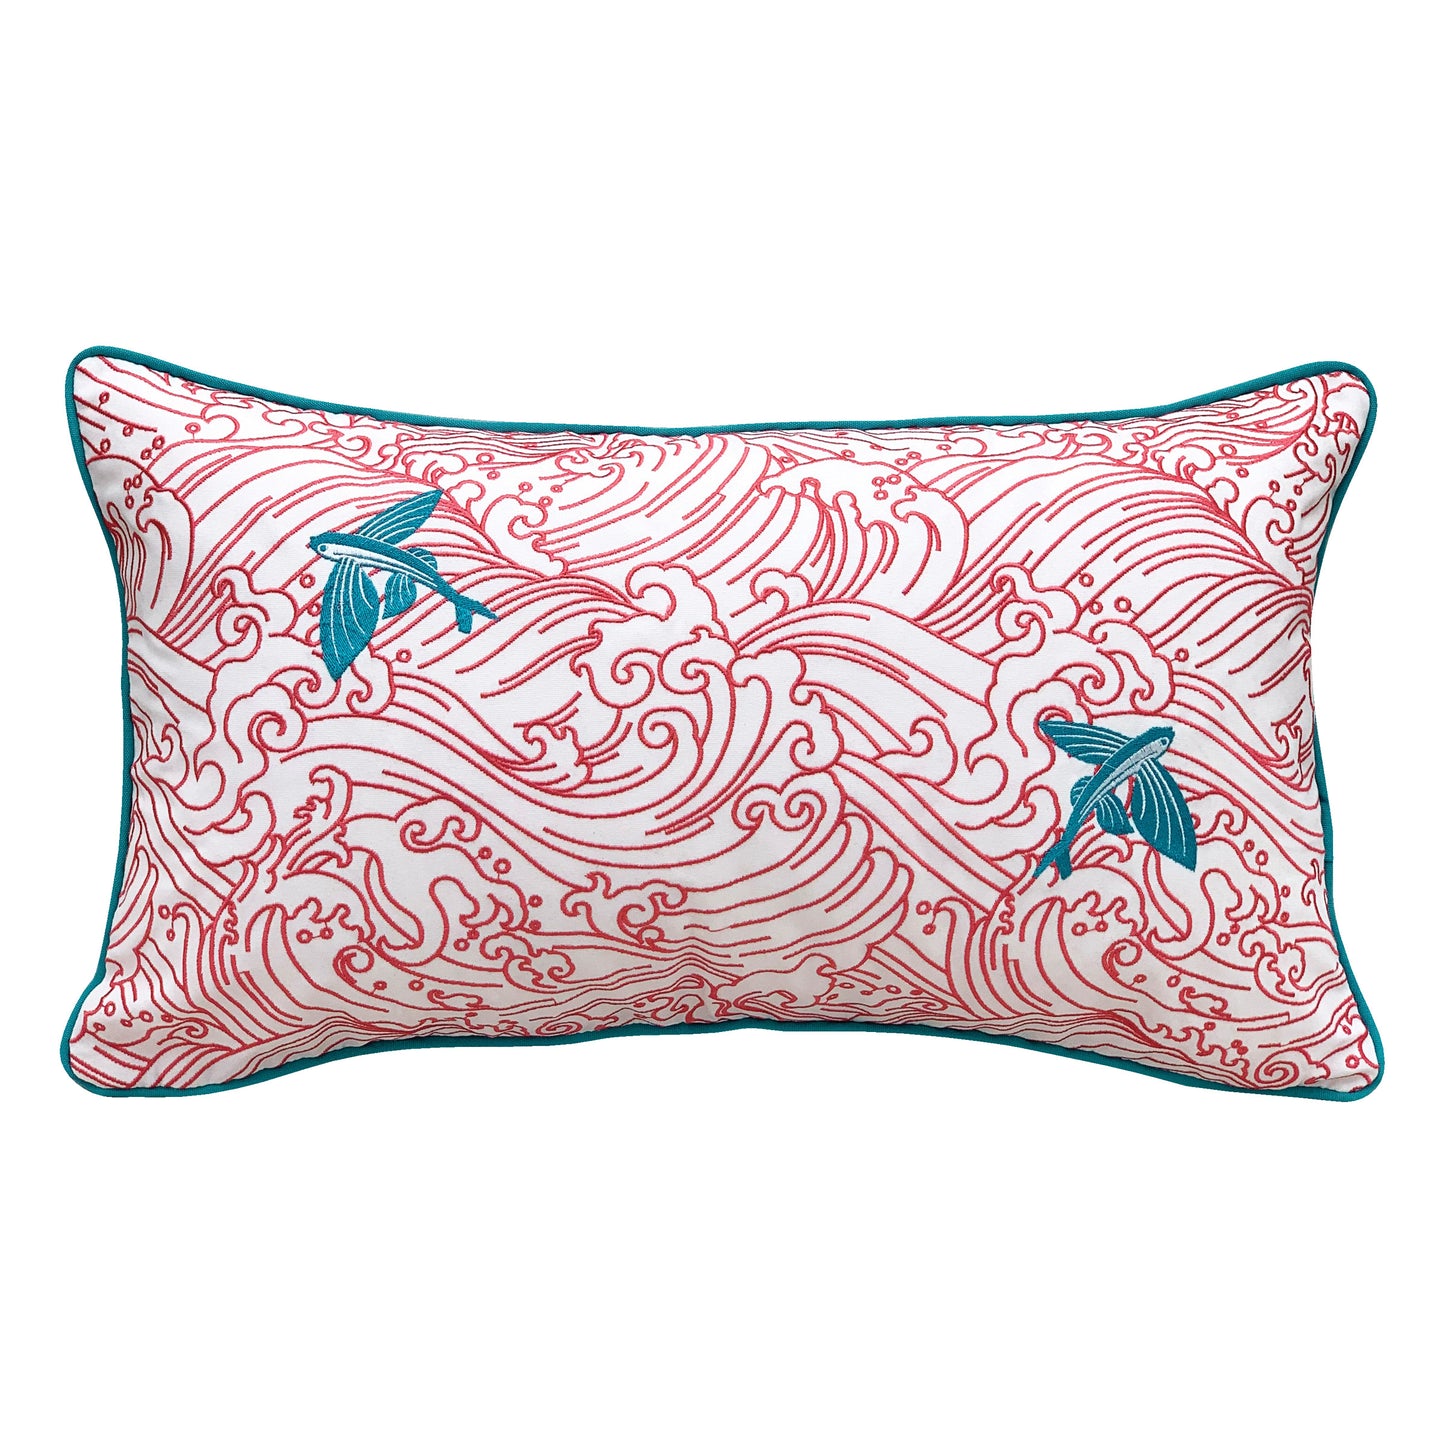 Embroidered coral lines swirl together to create whimsical waves on a white background. Two blue flying fish jump from the waves; the pillow is finished with blue piped edging.